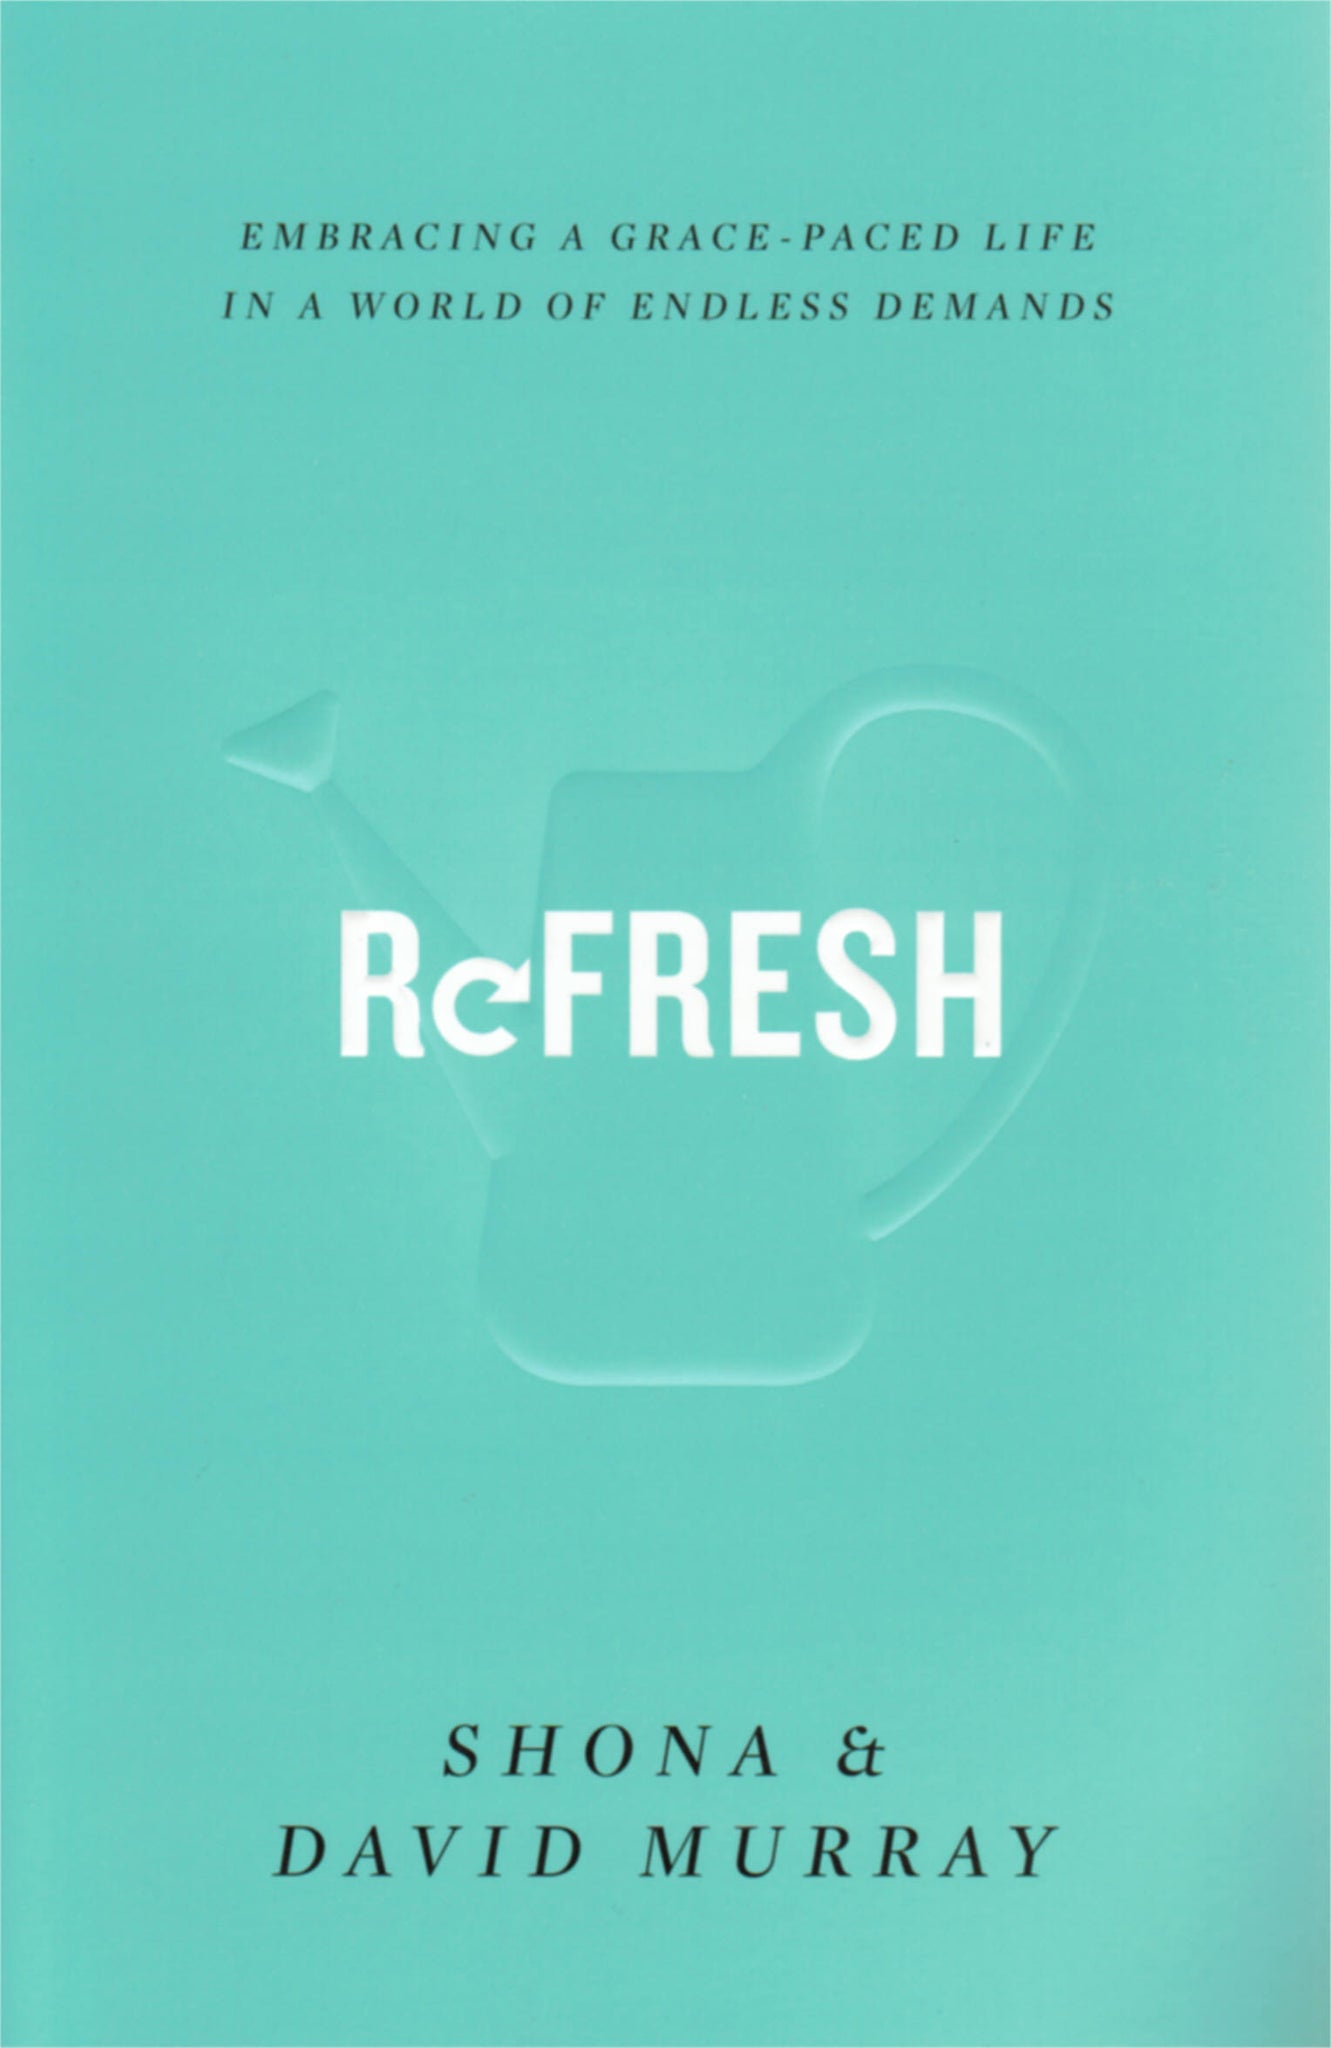 ReFresh: Embracing a Grace-Paced Life in a World of Endless Demands